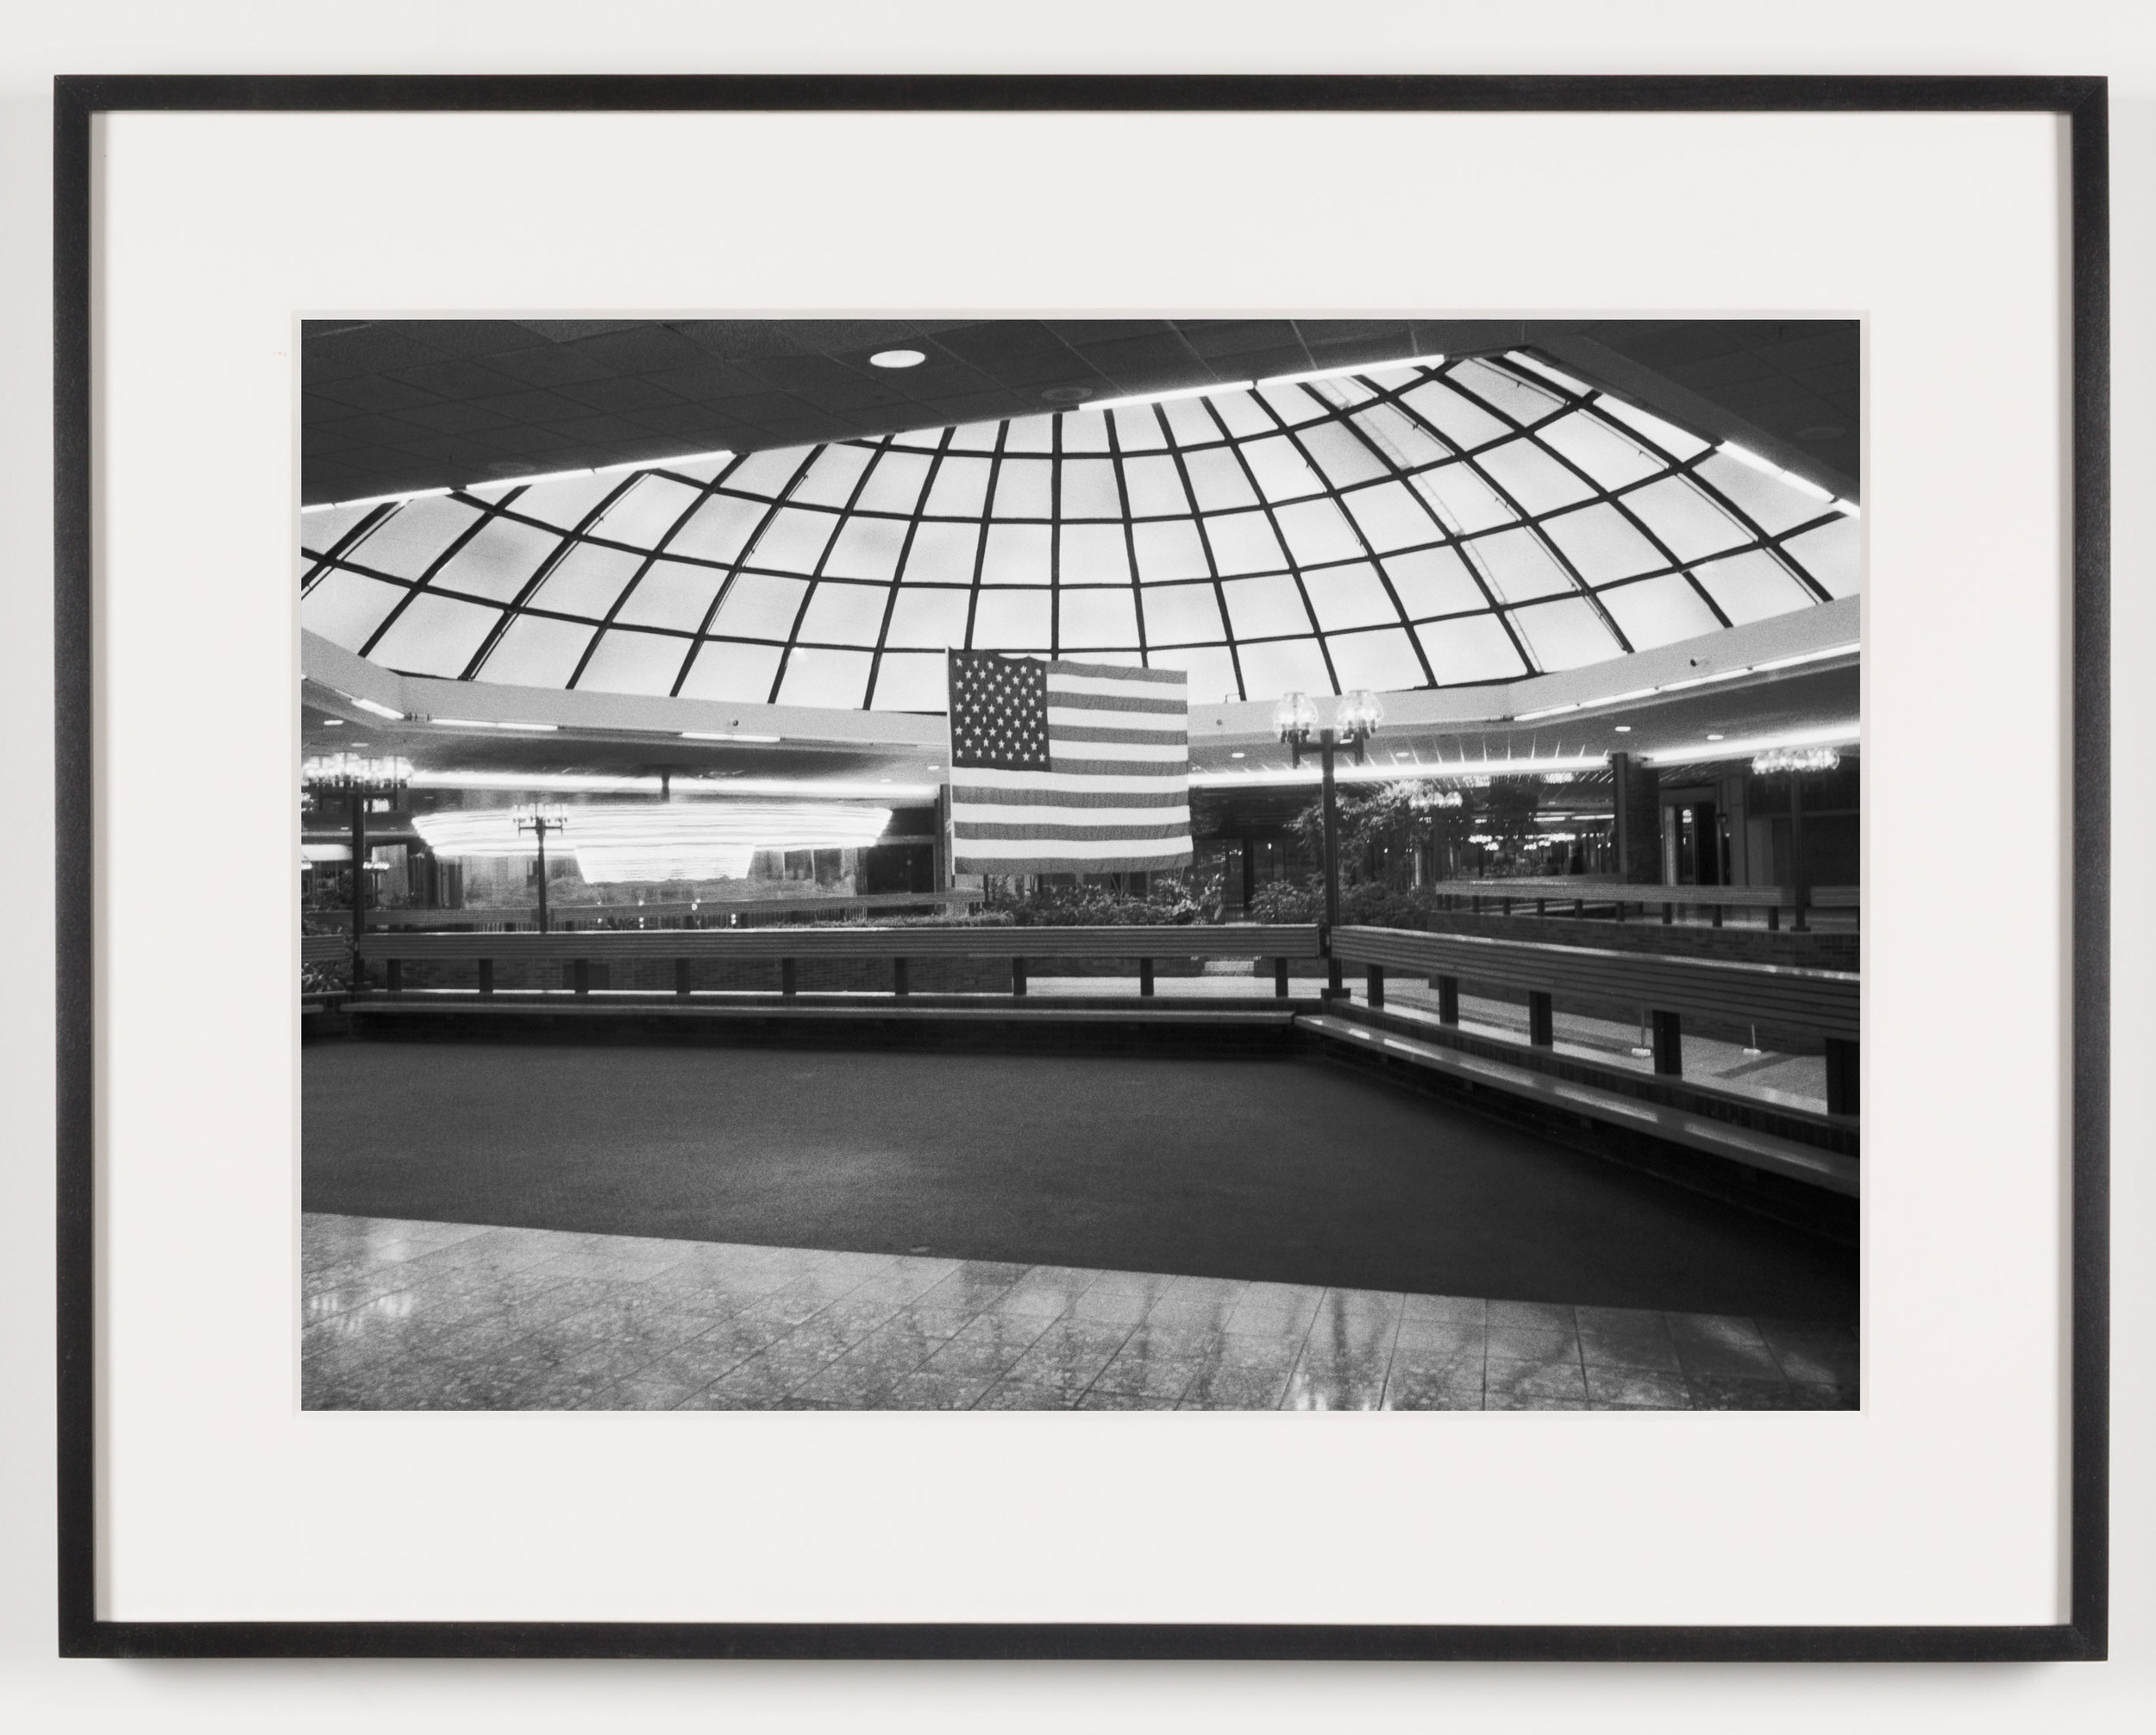   Southwyck Mall (View of Fountain), Toledo, OH, Est. 1972, Demo. 2009    2011   Epson Ultrachrome K3 archival ink jet print on Hahnemühle Photo Rag paper  21 5/8 x 28 1/8 inches   American Passages, 2001–2011     